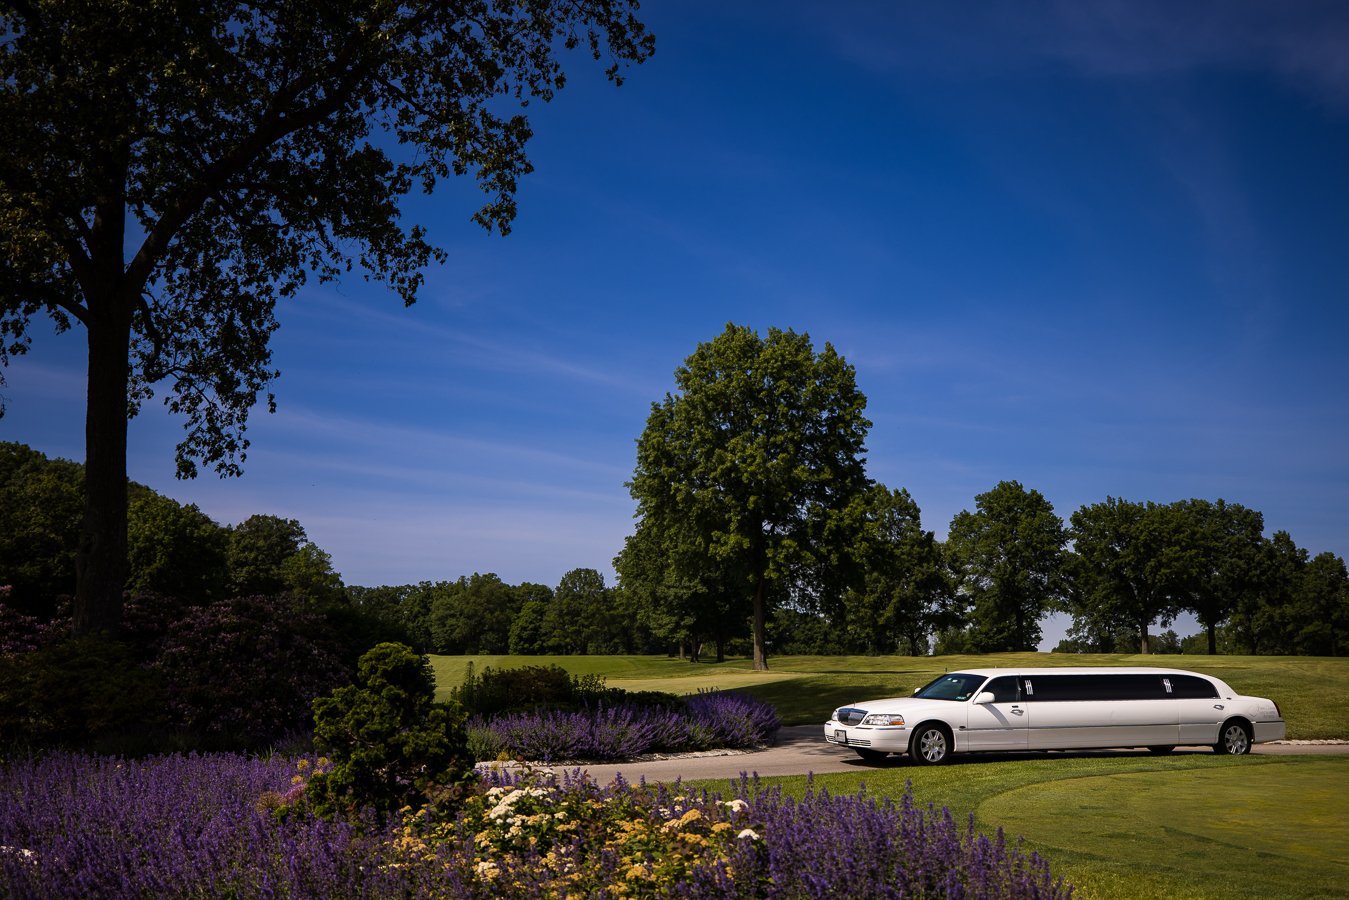 pa wedding photographer, Lisa rhinehart, captures this colorful image of the country club's landscape and the white limo as it pulls up to the venue